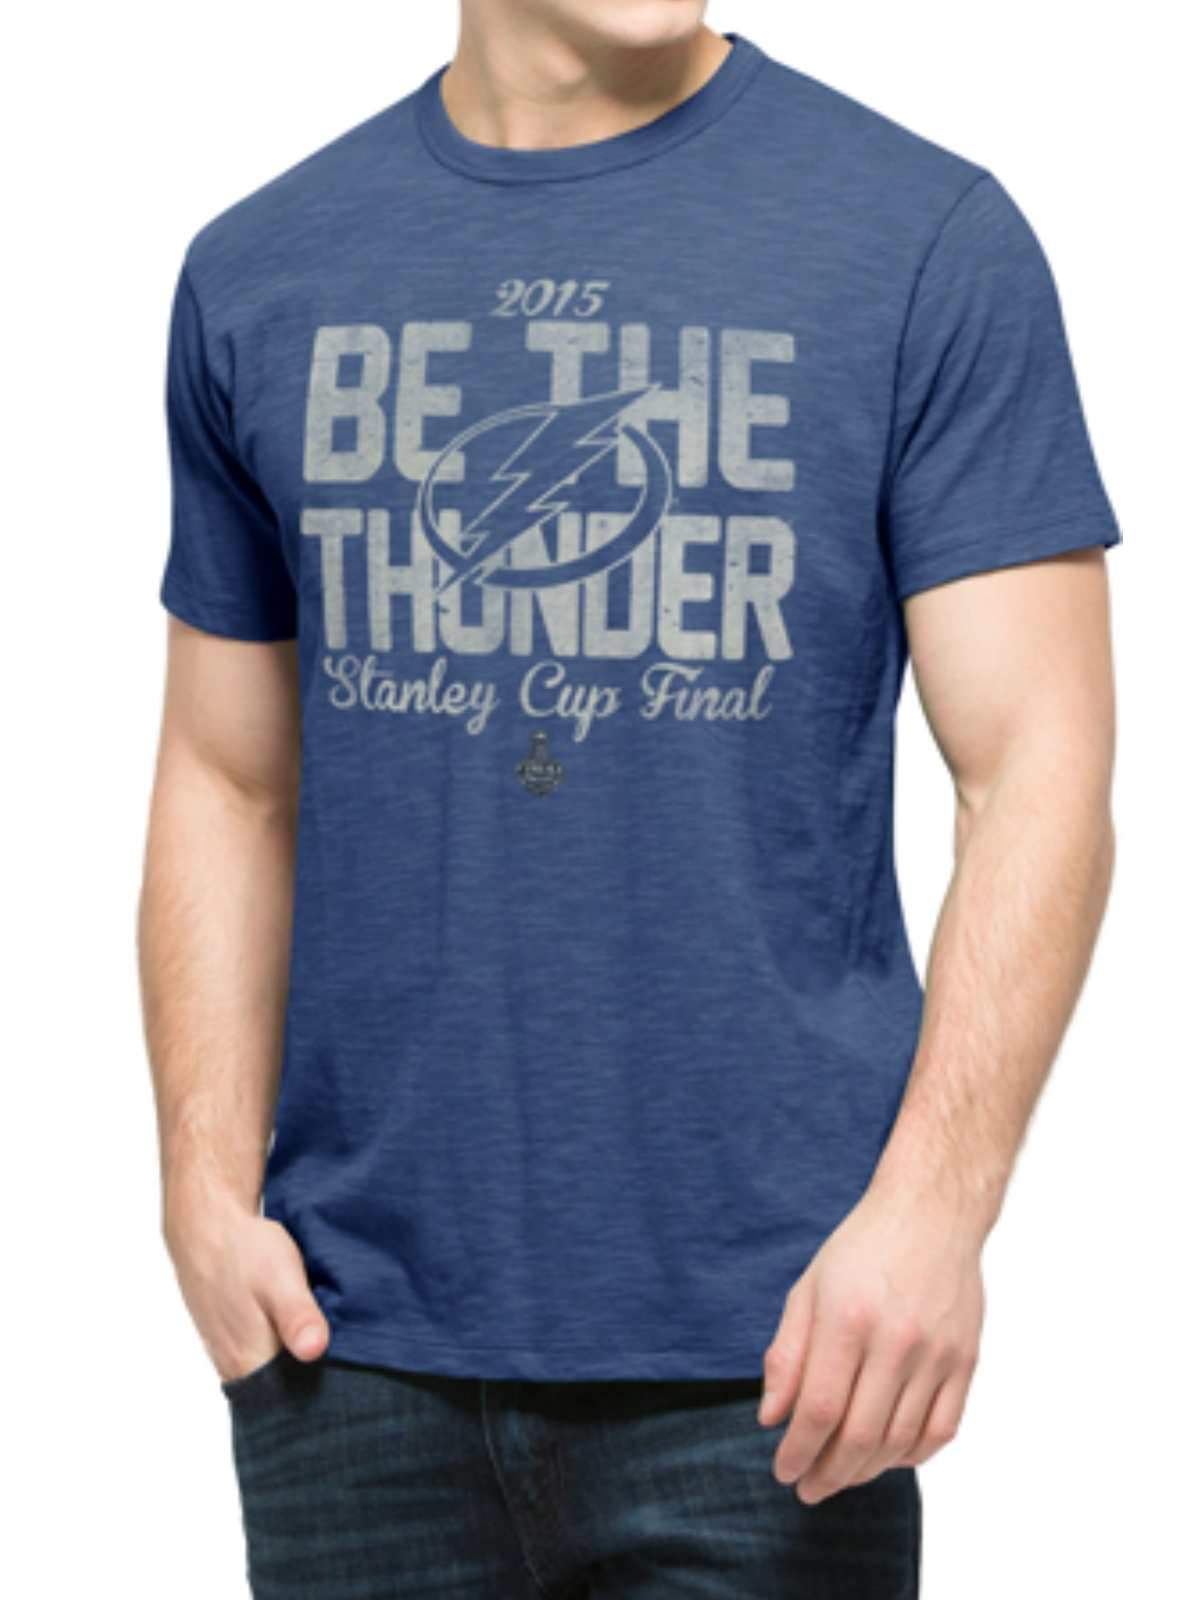 Tampa Bay Lightning Stanley Cup championship gear: Shop around for